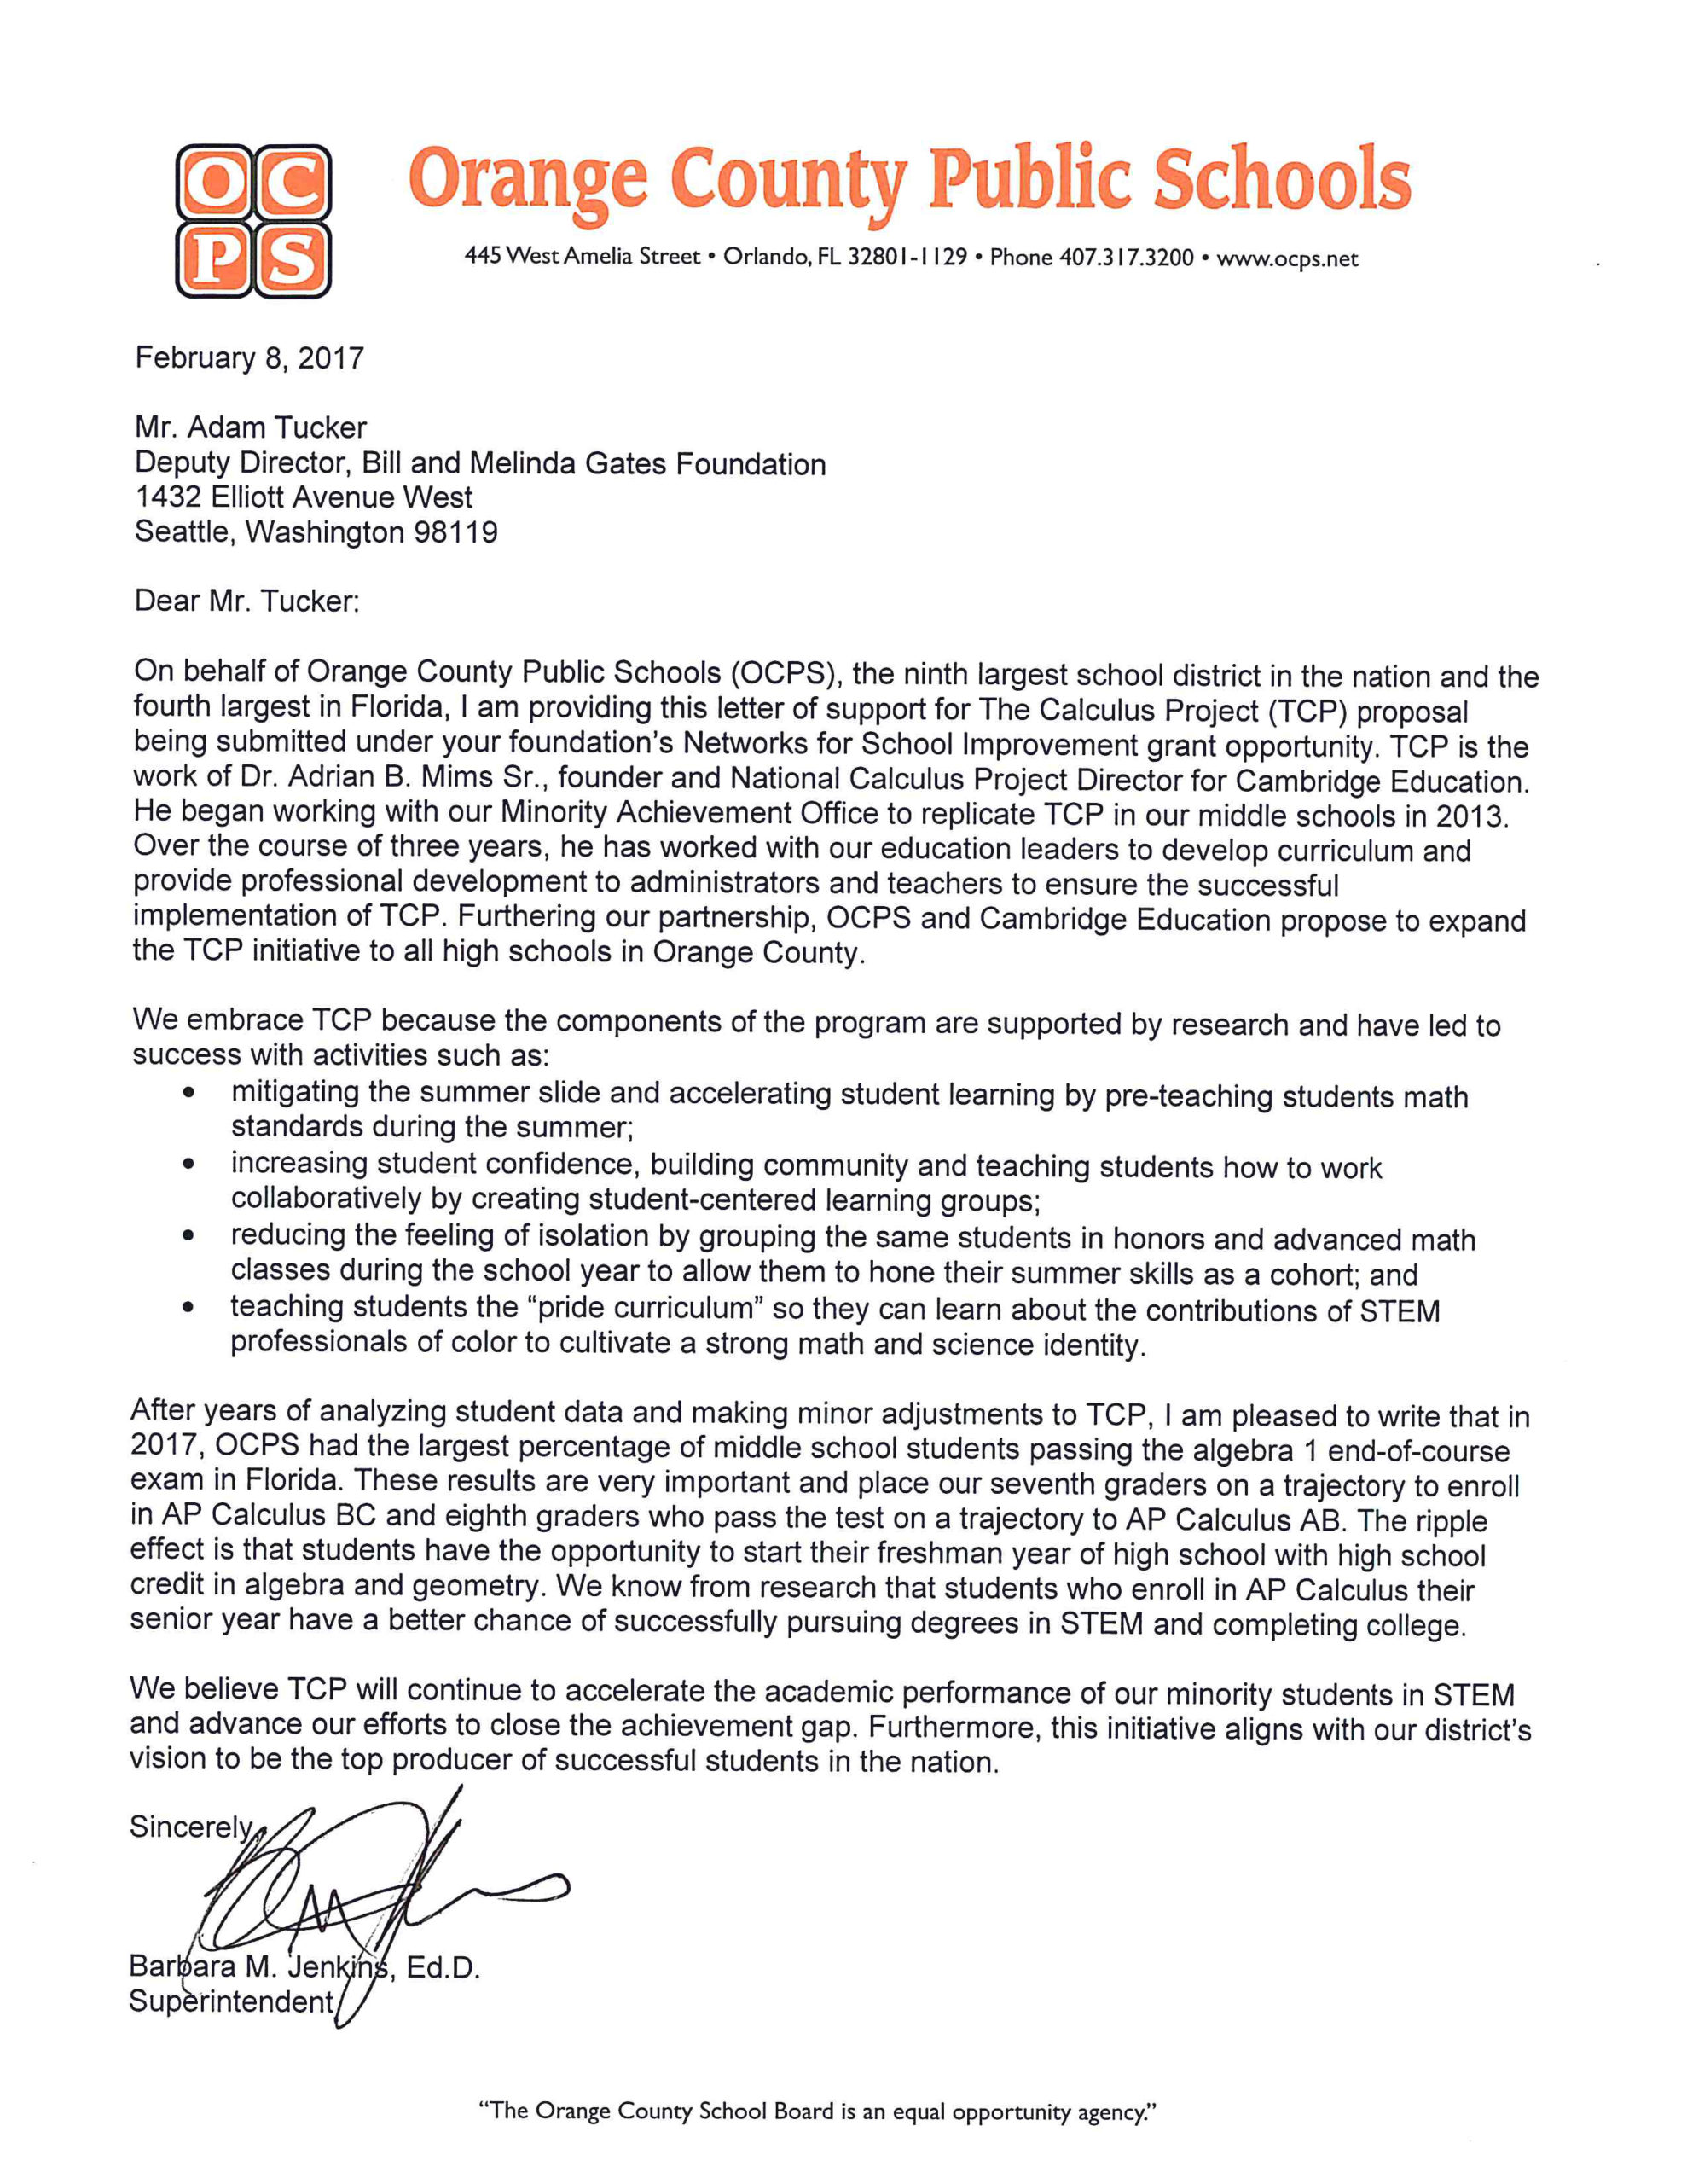 Letter of Support from Orange County Public Schools